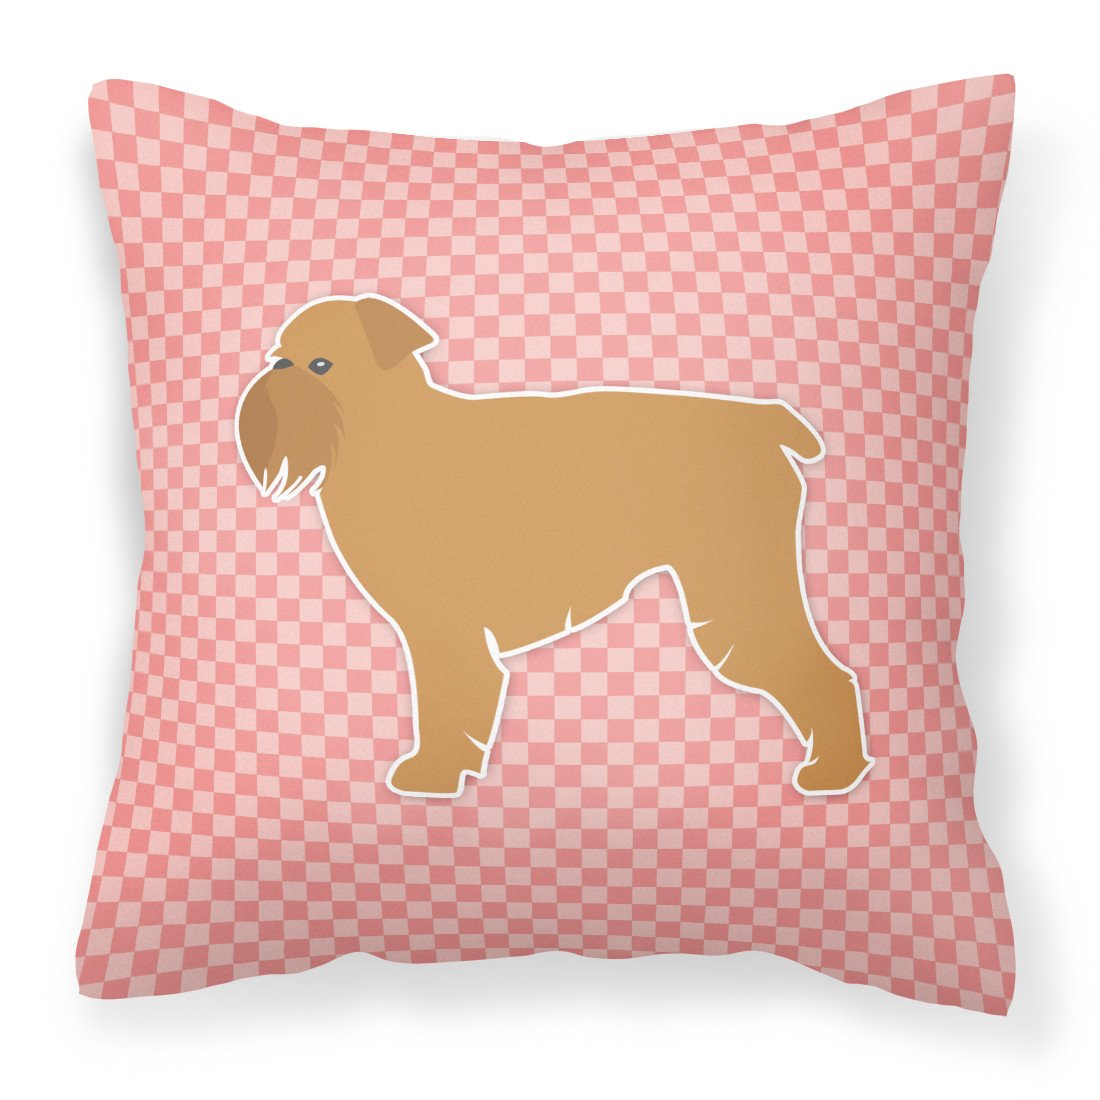 Brussels Griffon Checkerboard Pink Fabric Decorative Pillow BB3640PW1818 by Caroline's Treasures